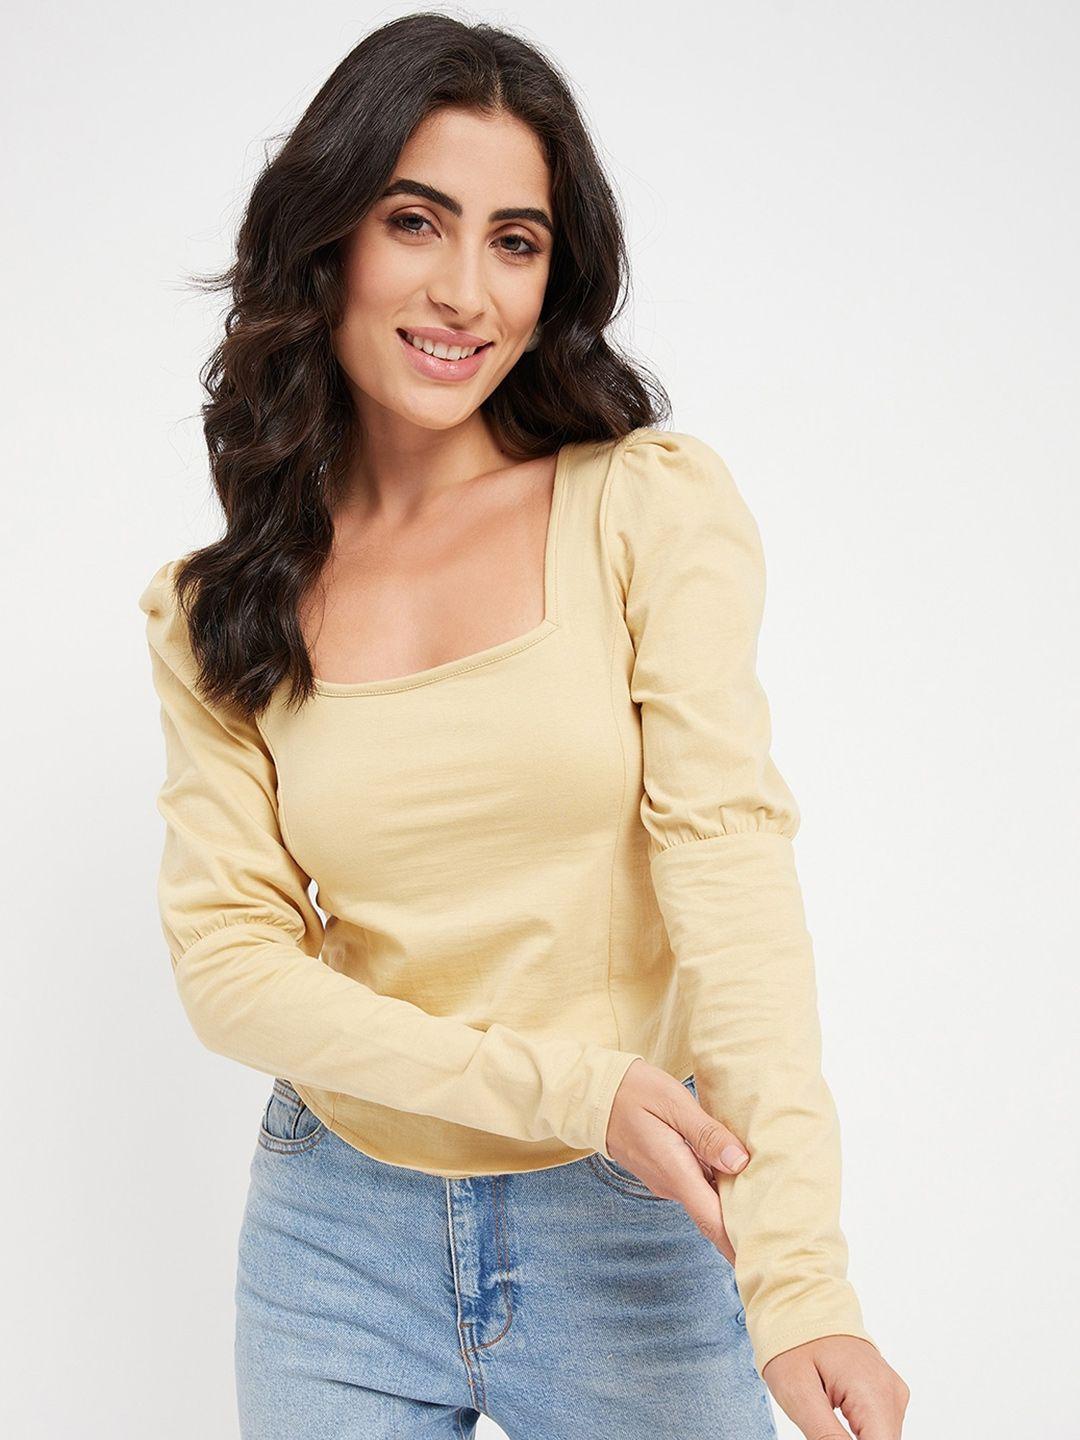 brinns puff sleeves square neck top